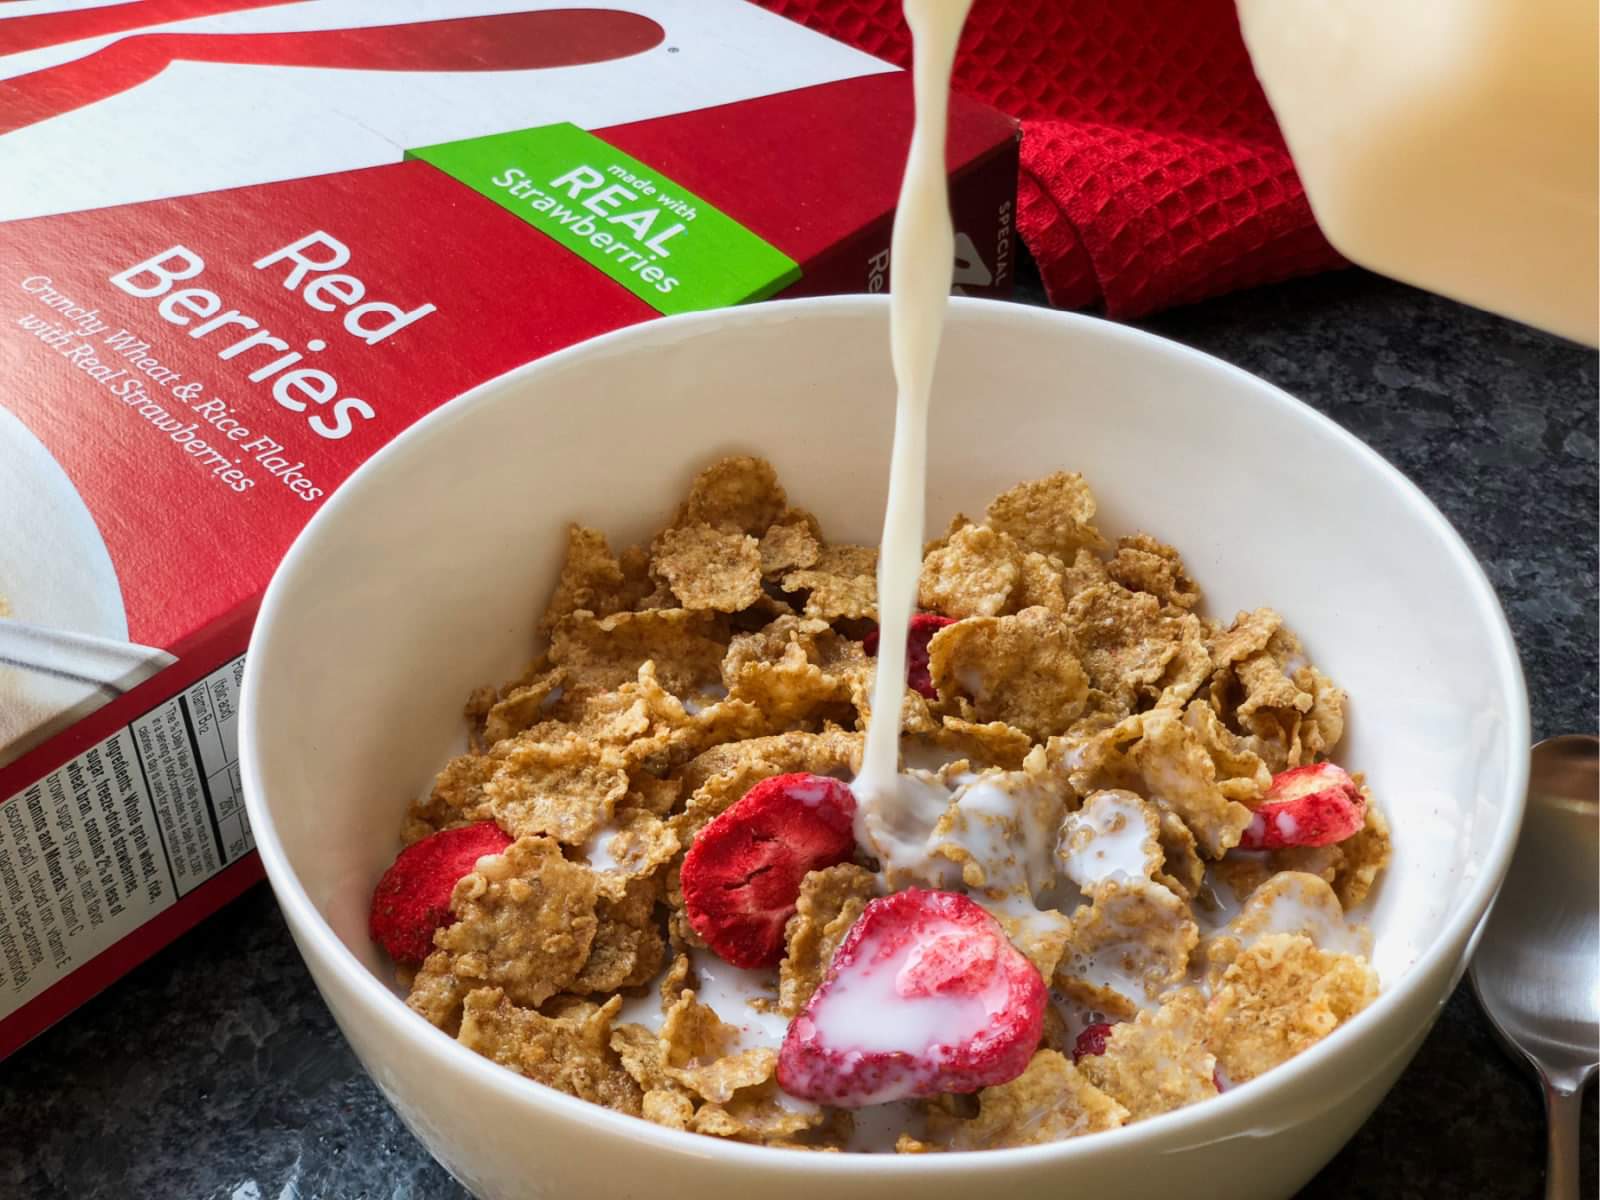 Get Boxes Of Kellogg’s Special K Cereal As Low As $2.20 Per Box At Publix